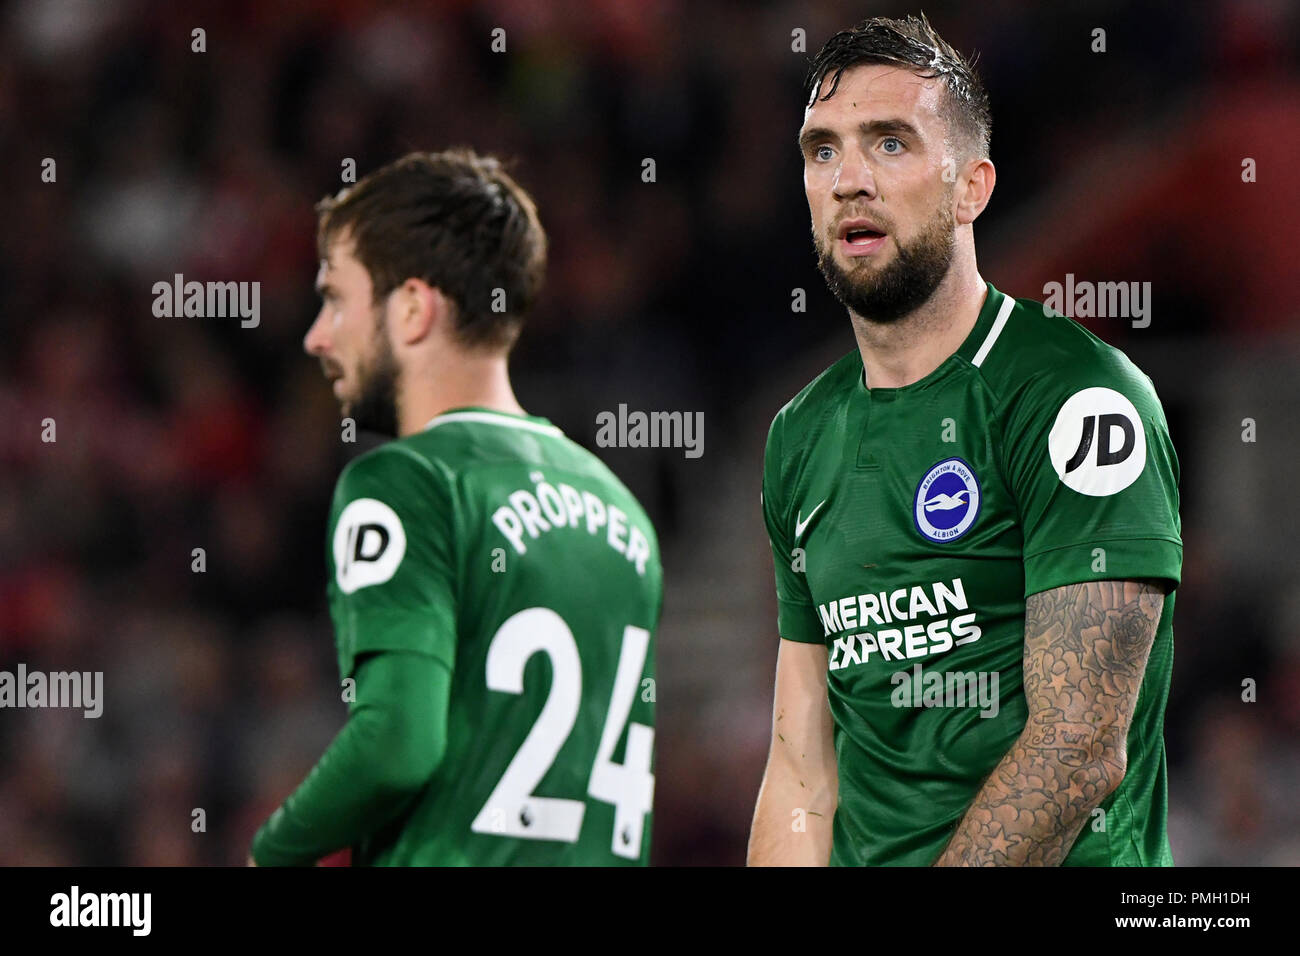 Shane Duffy of Brighton & Hove Albion - Southampton v Brighton & Hove Albion, Premier League, St Mary's Stadium, Southampton - 17th September 2018  STRICTLY EDITORIAL USE ONLY - DataCo rules apply - The use of this image in a commercial context is strictly prohibited unless express permission has been given by the club(s) concerned. Examples of commercial usage include, but are not limited to, use in betting and gaming, marketing and advertising products. No use with unauthorised audio, video, data, fixture lists, club and or league logos or services including those listed as 'live' Stock Photo